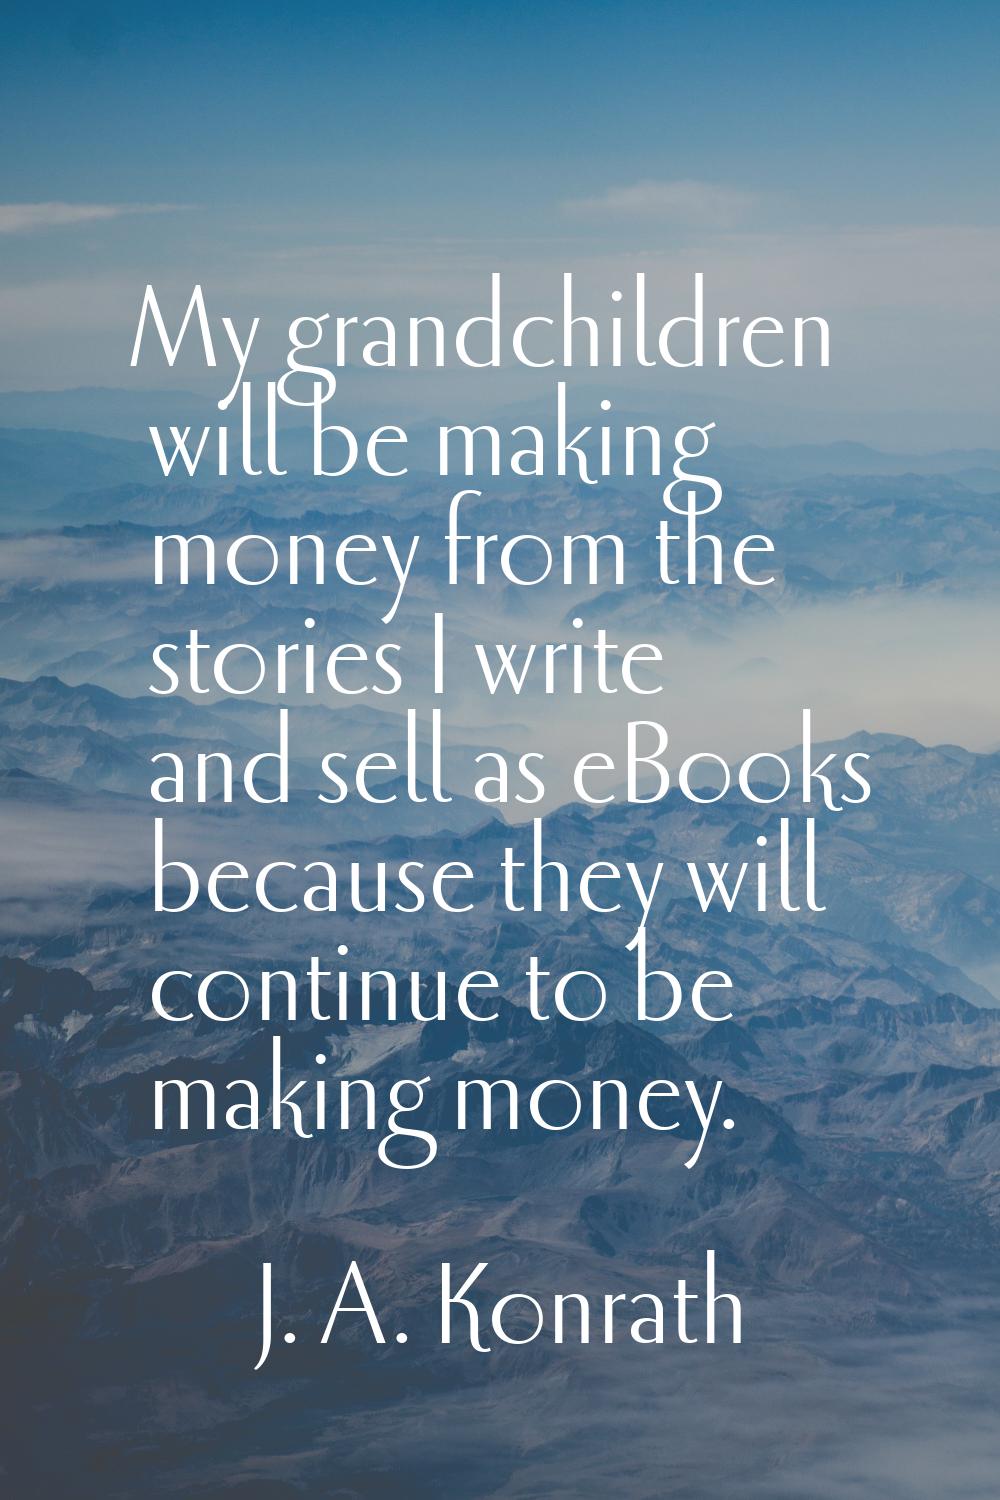 My grandchildren will be making money from the stories I write and sell as eBooks because they will